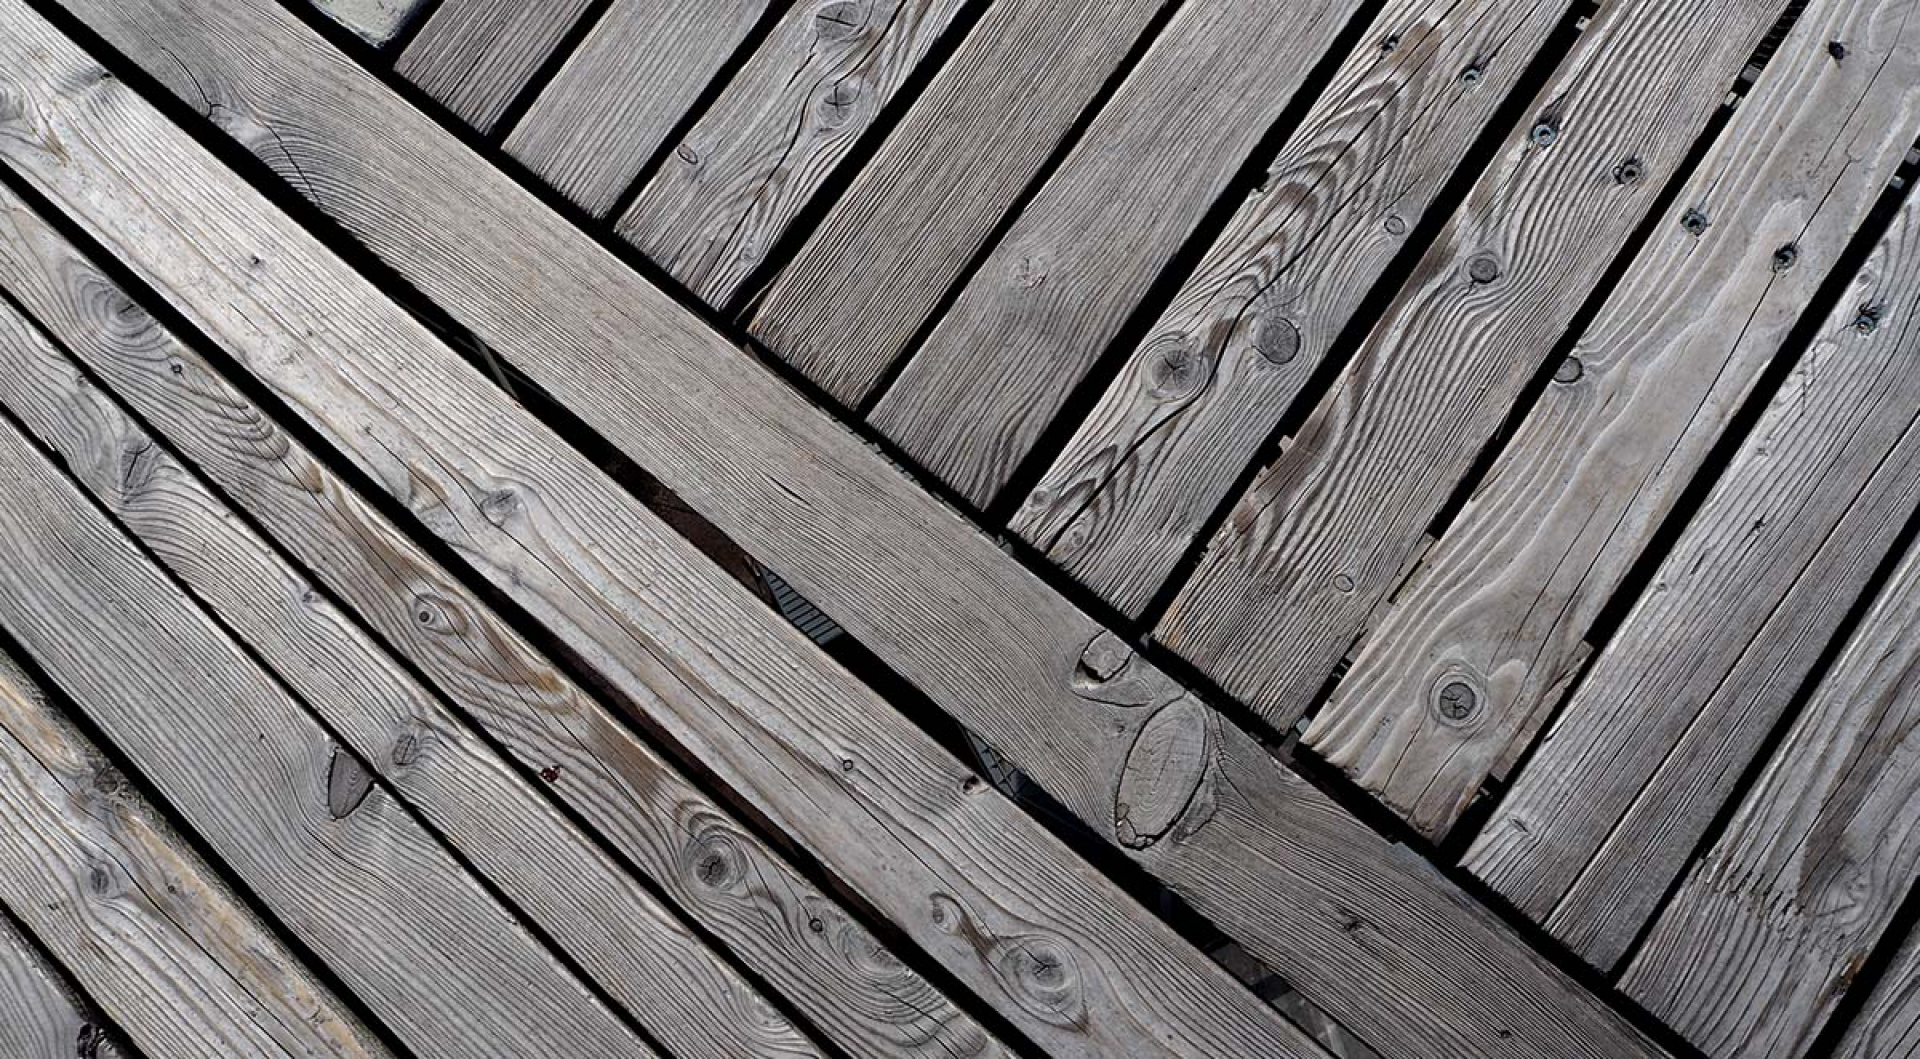 Seal, Stain, or Paint: Which Is Better for Your Deck?